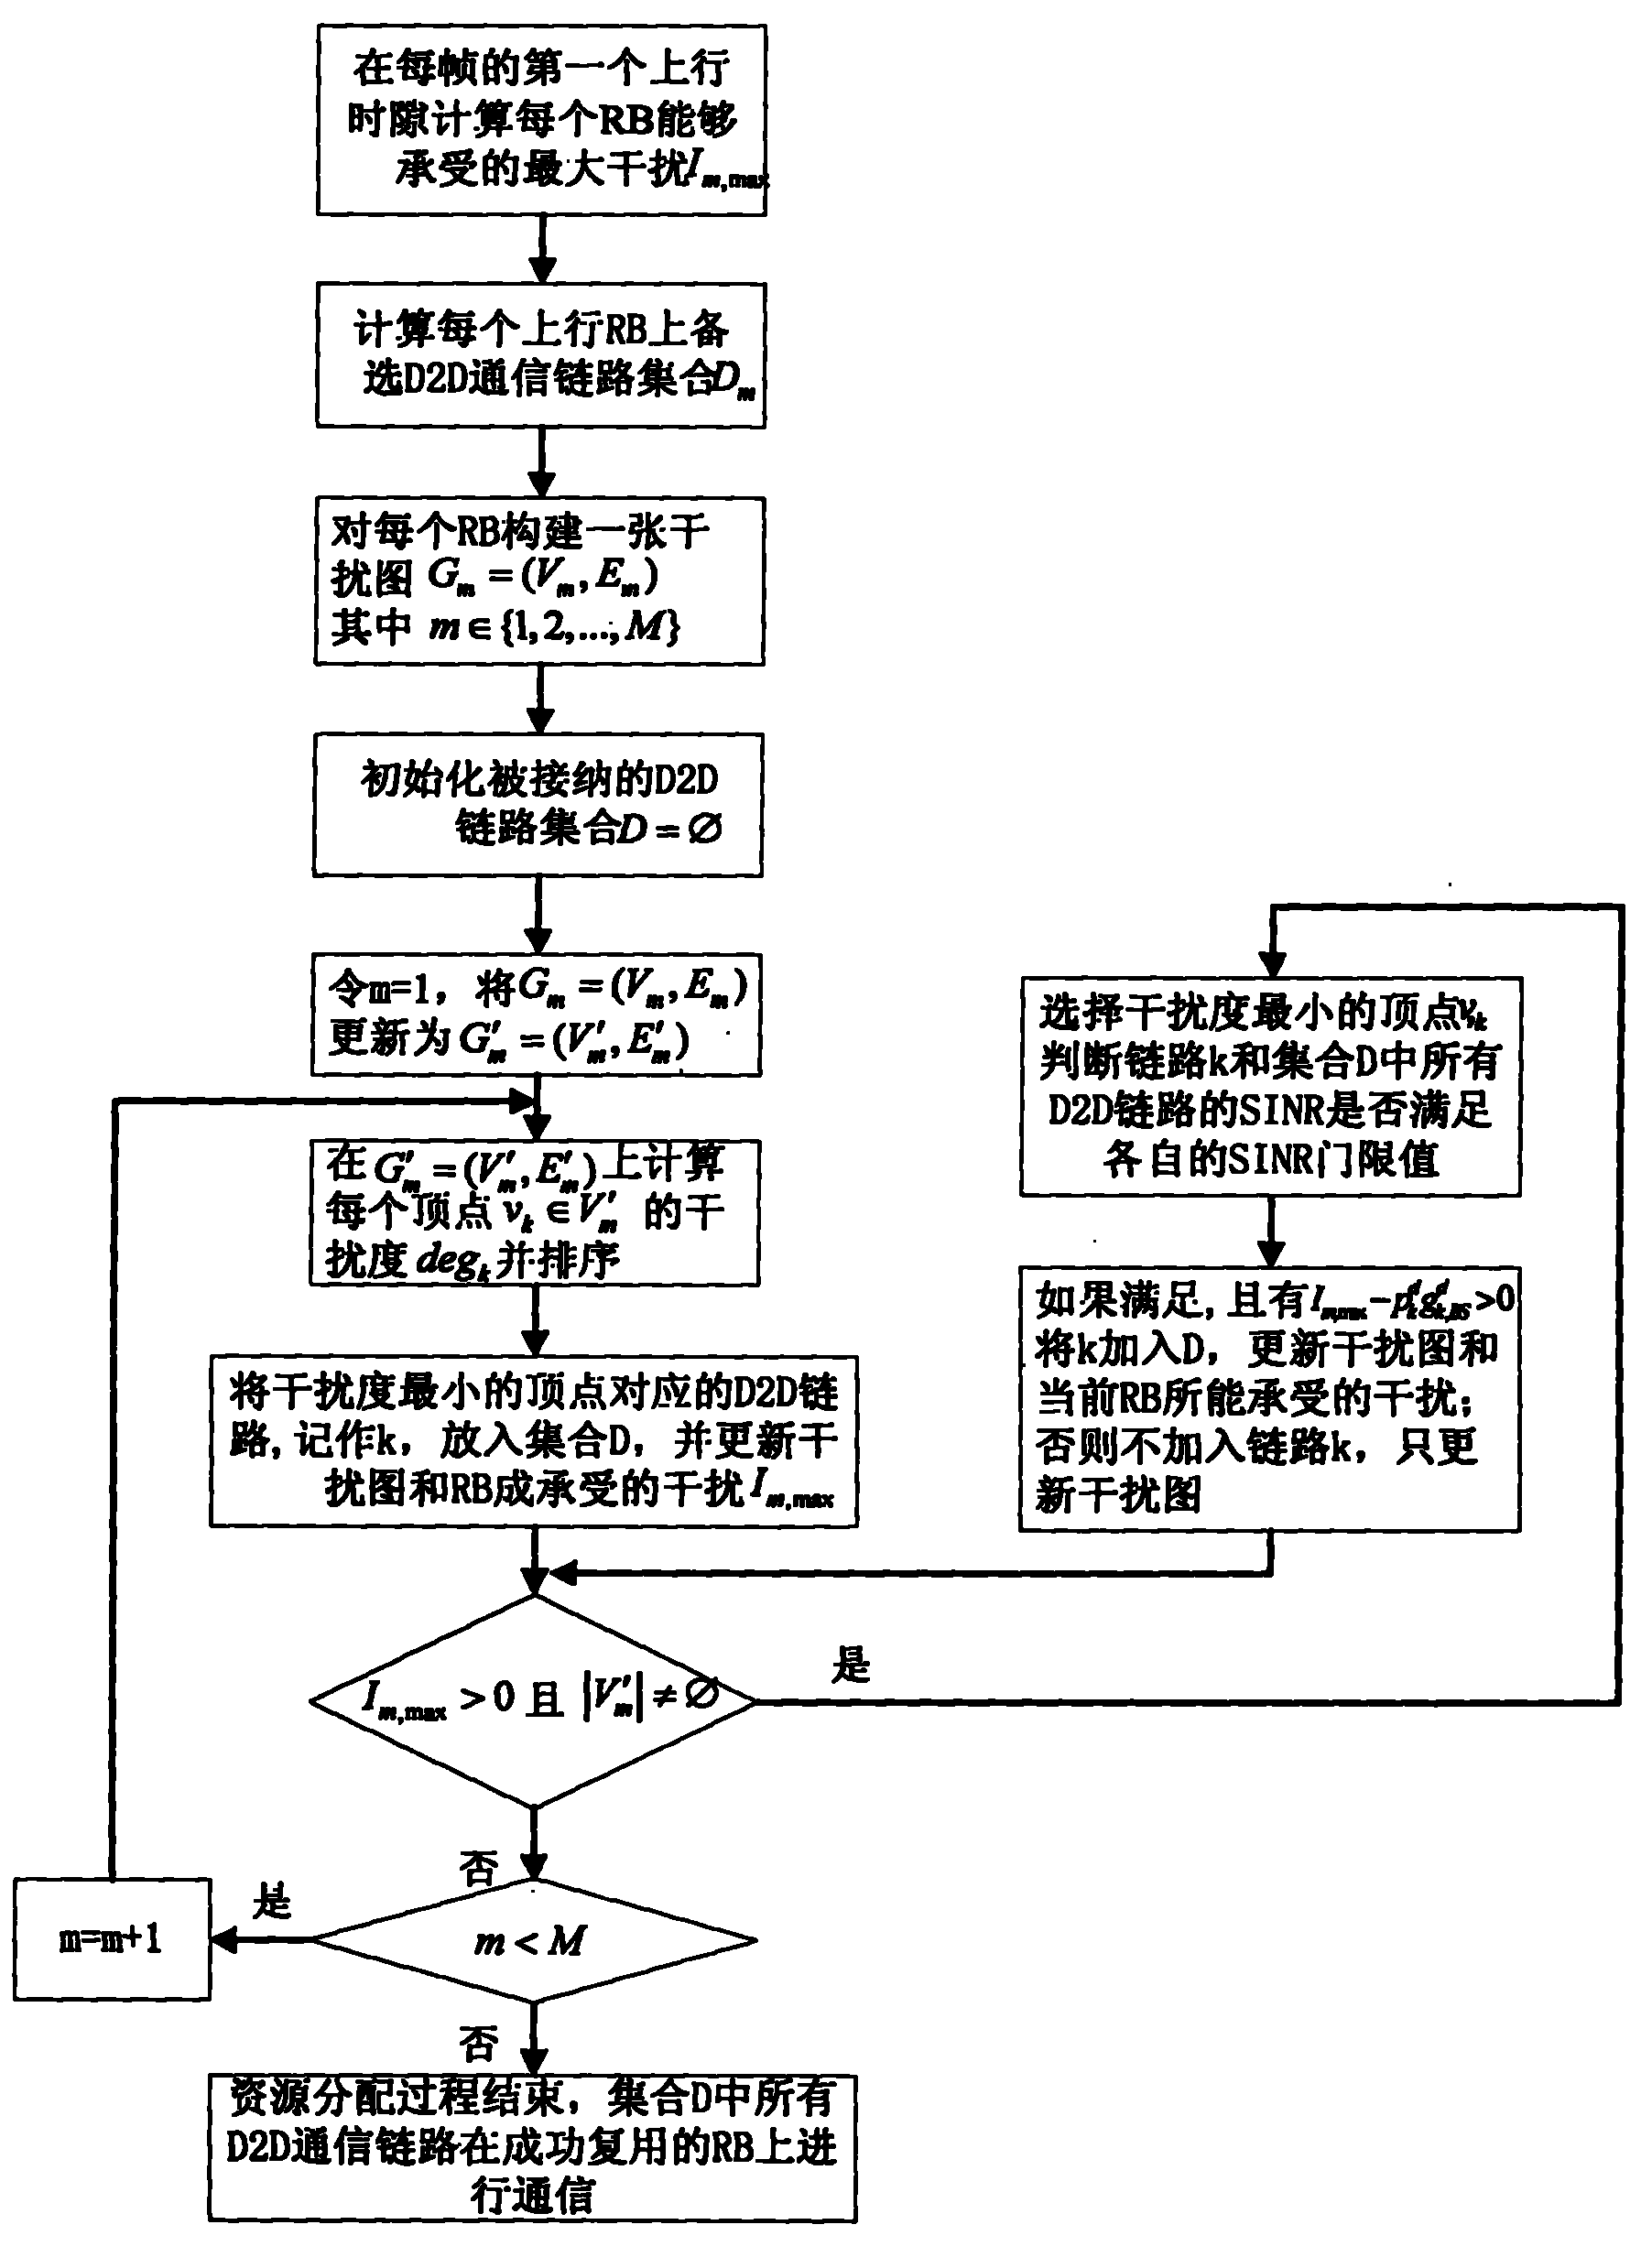 Resource distribution method of D2D communication in LTE-A cellular network